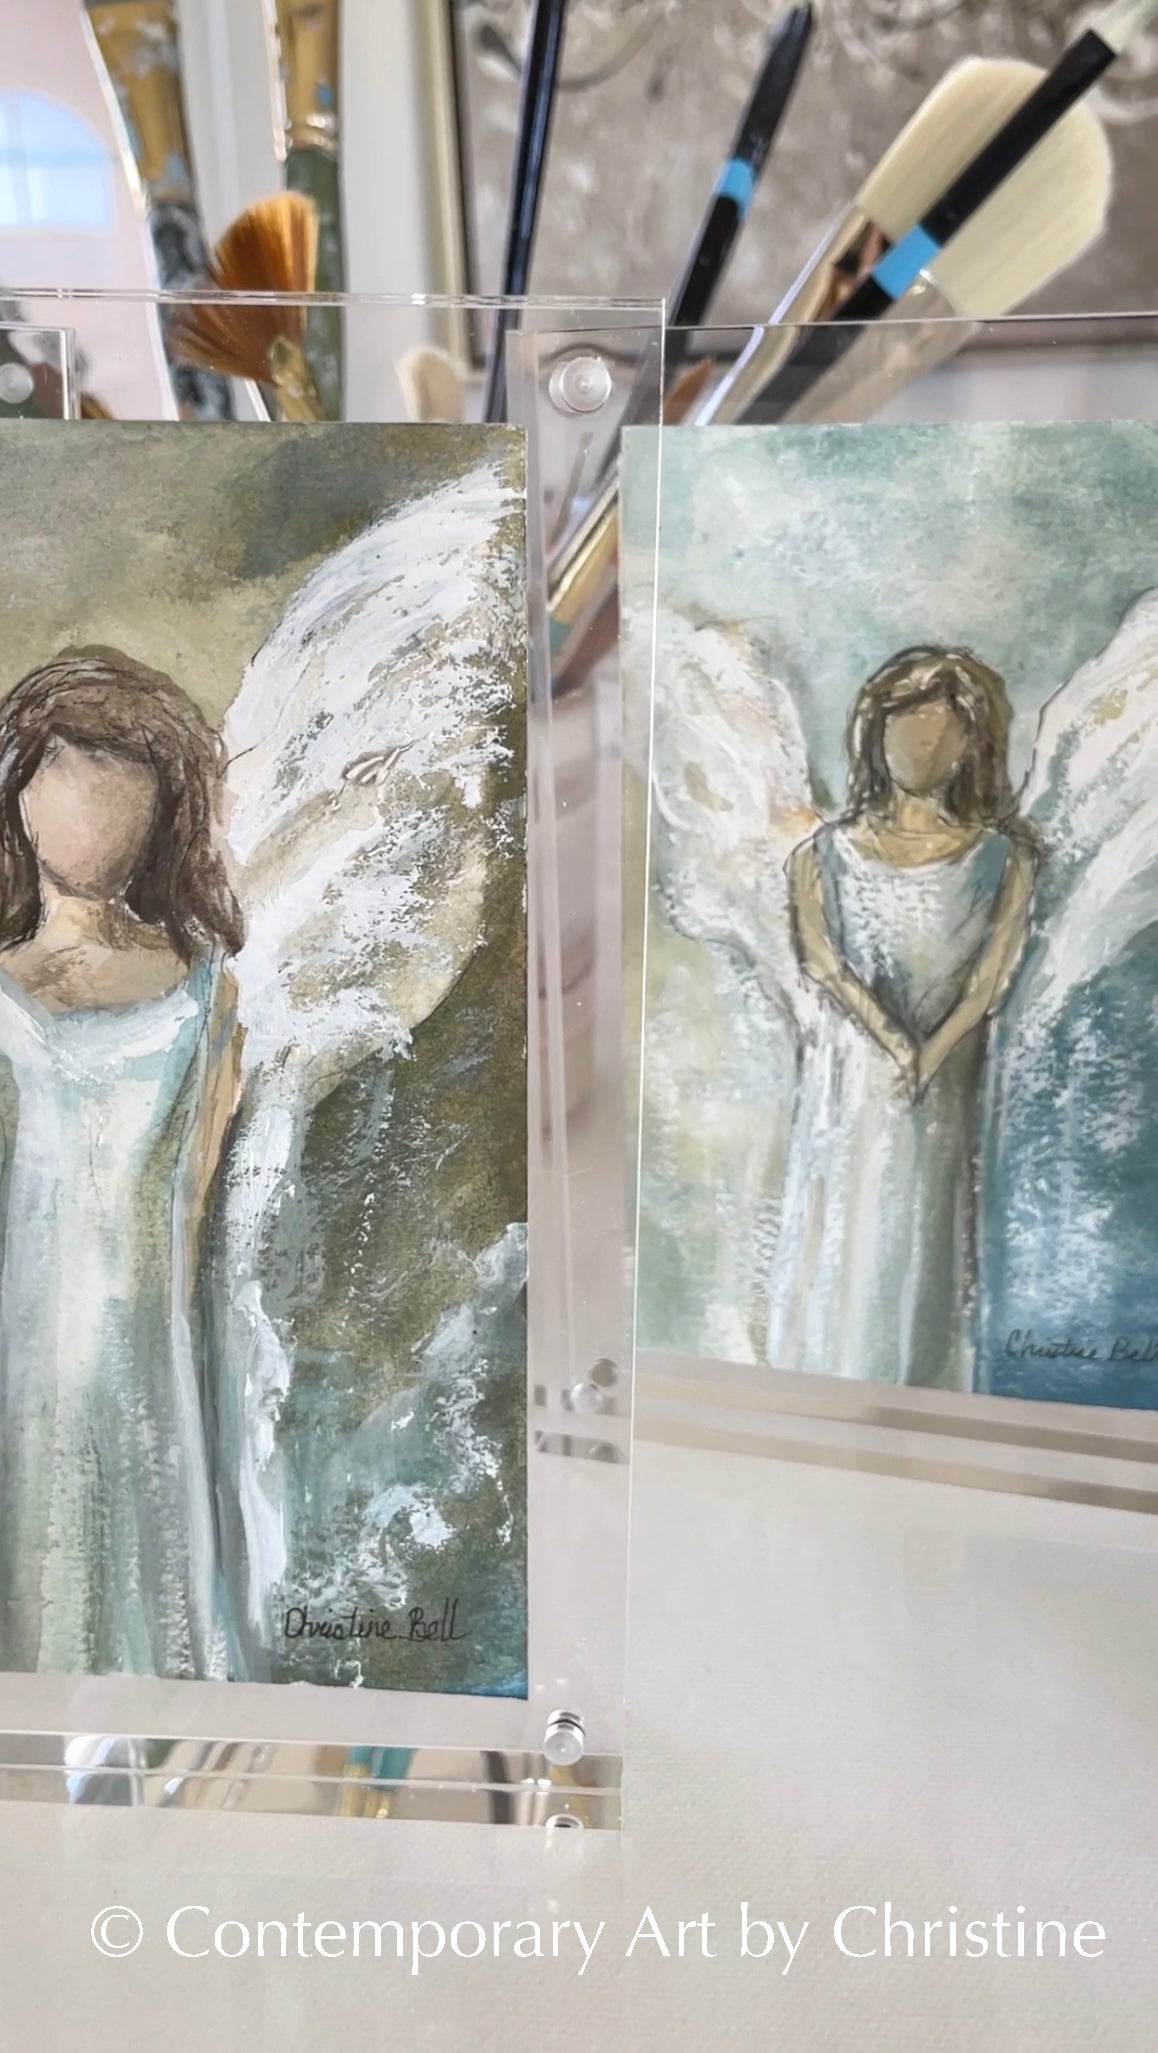 "Let Me Lead You" ORIGINAL ANGEL PAINTING in Acrylic Block Frame